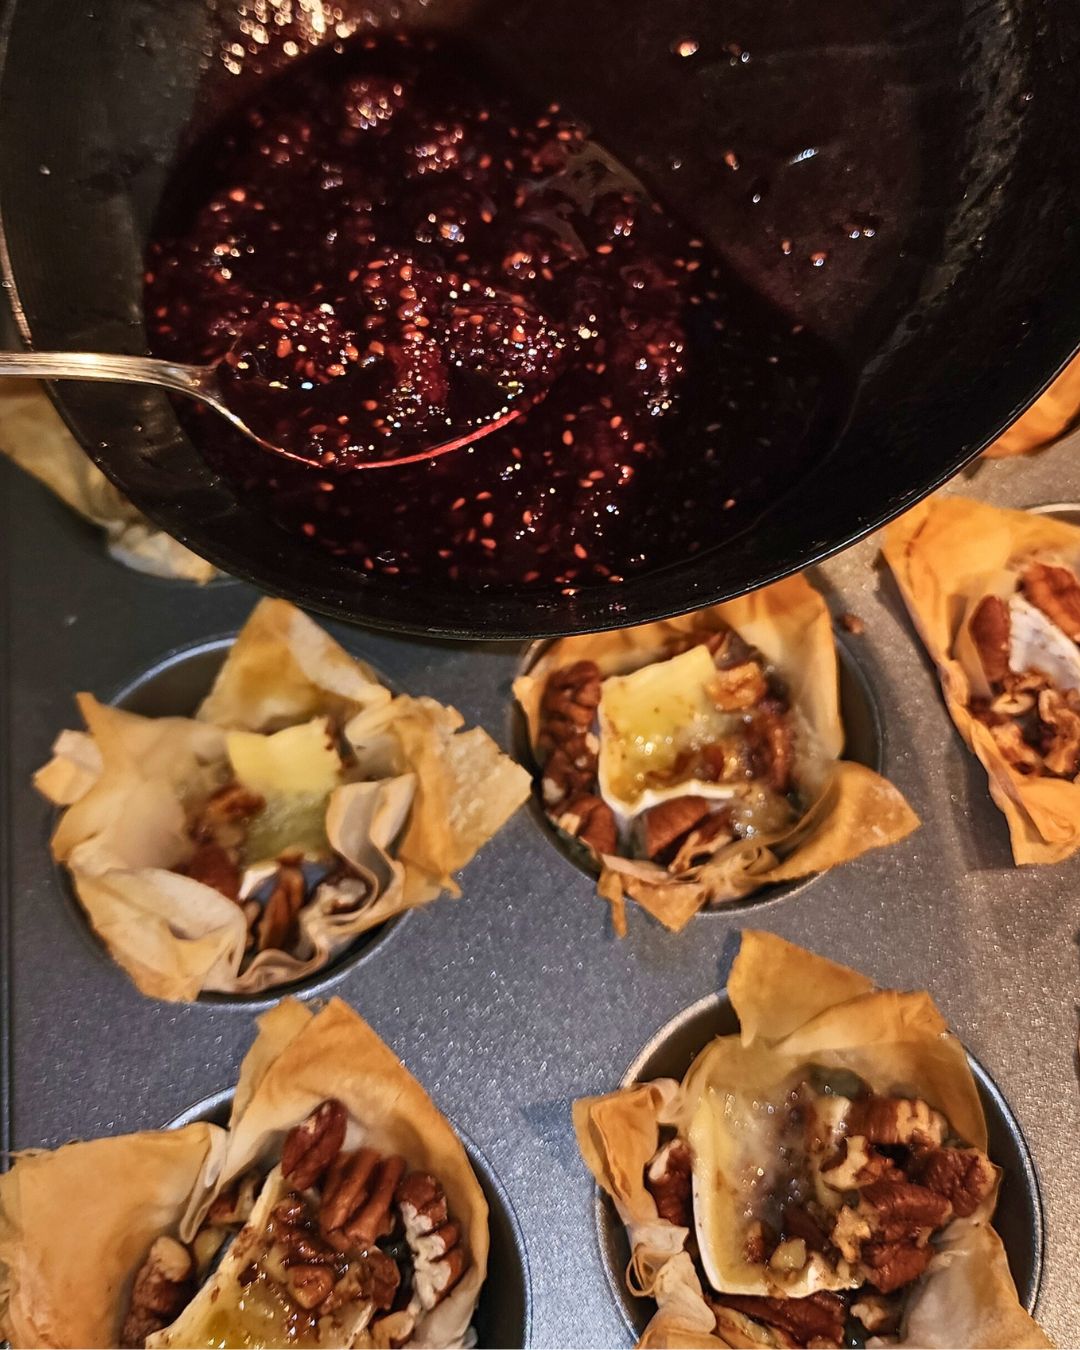 These bite-sized phyllo pastry brie bites are a crowd-pleaser. The combination of creamy brie, fruity blackberry compote, and crunchy pecans is irresistible.